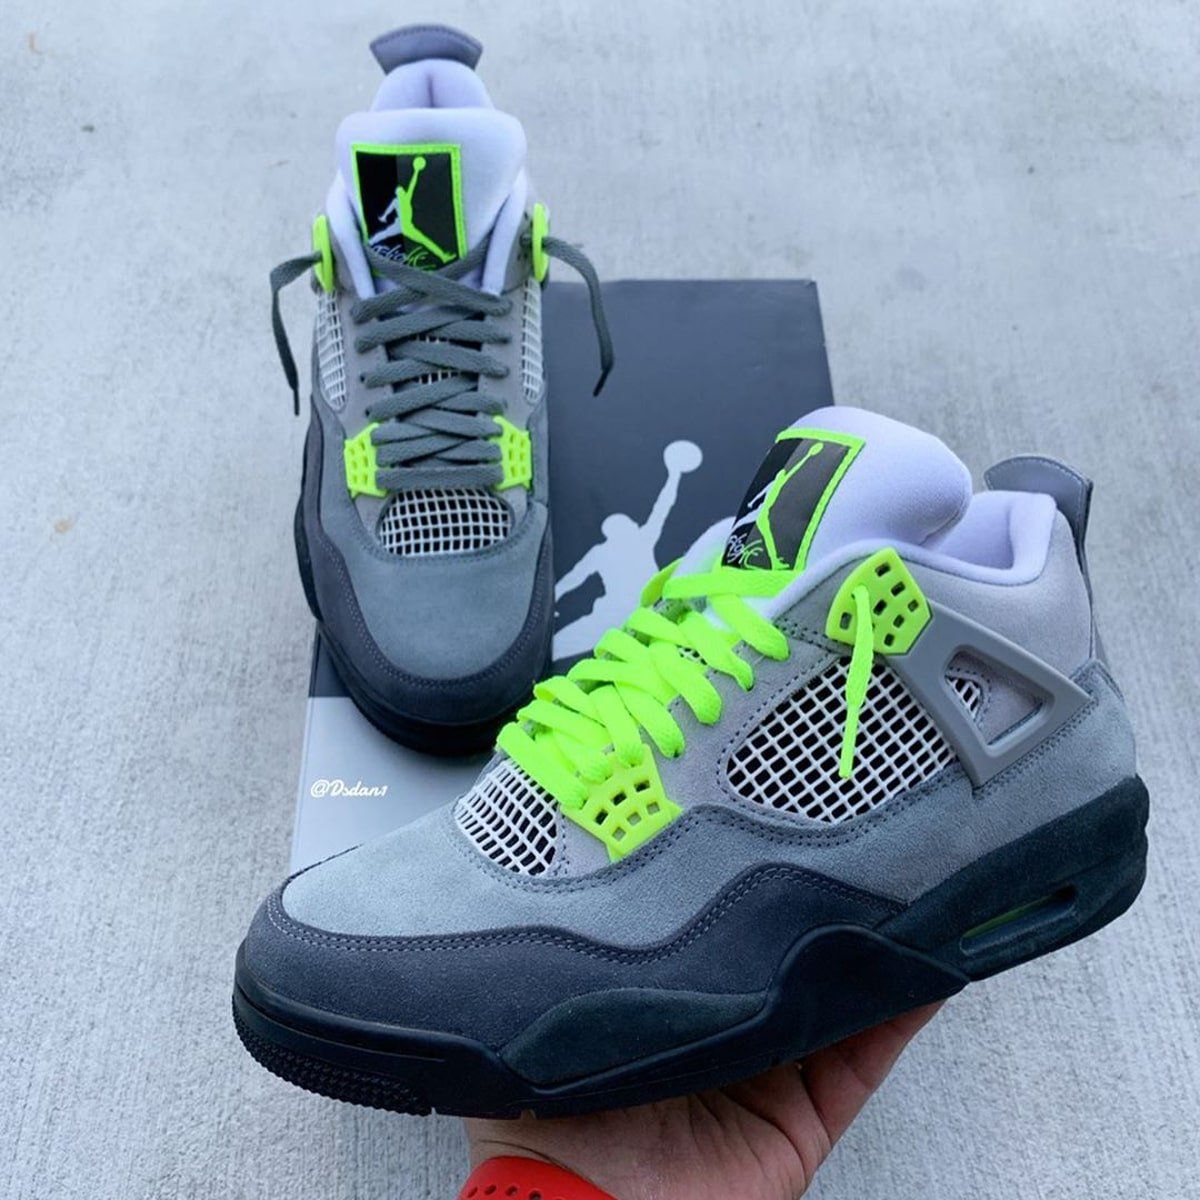 lime green and gray jordans